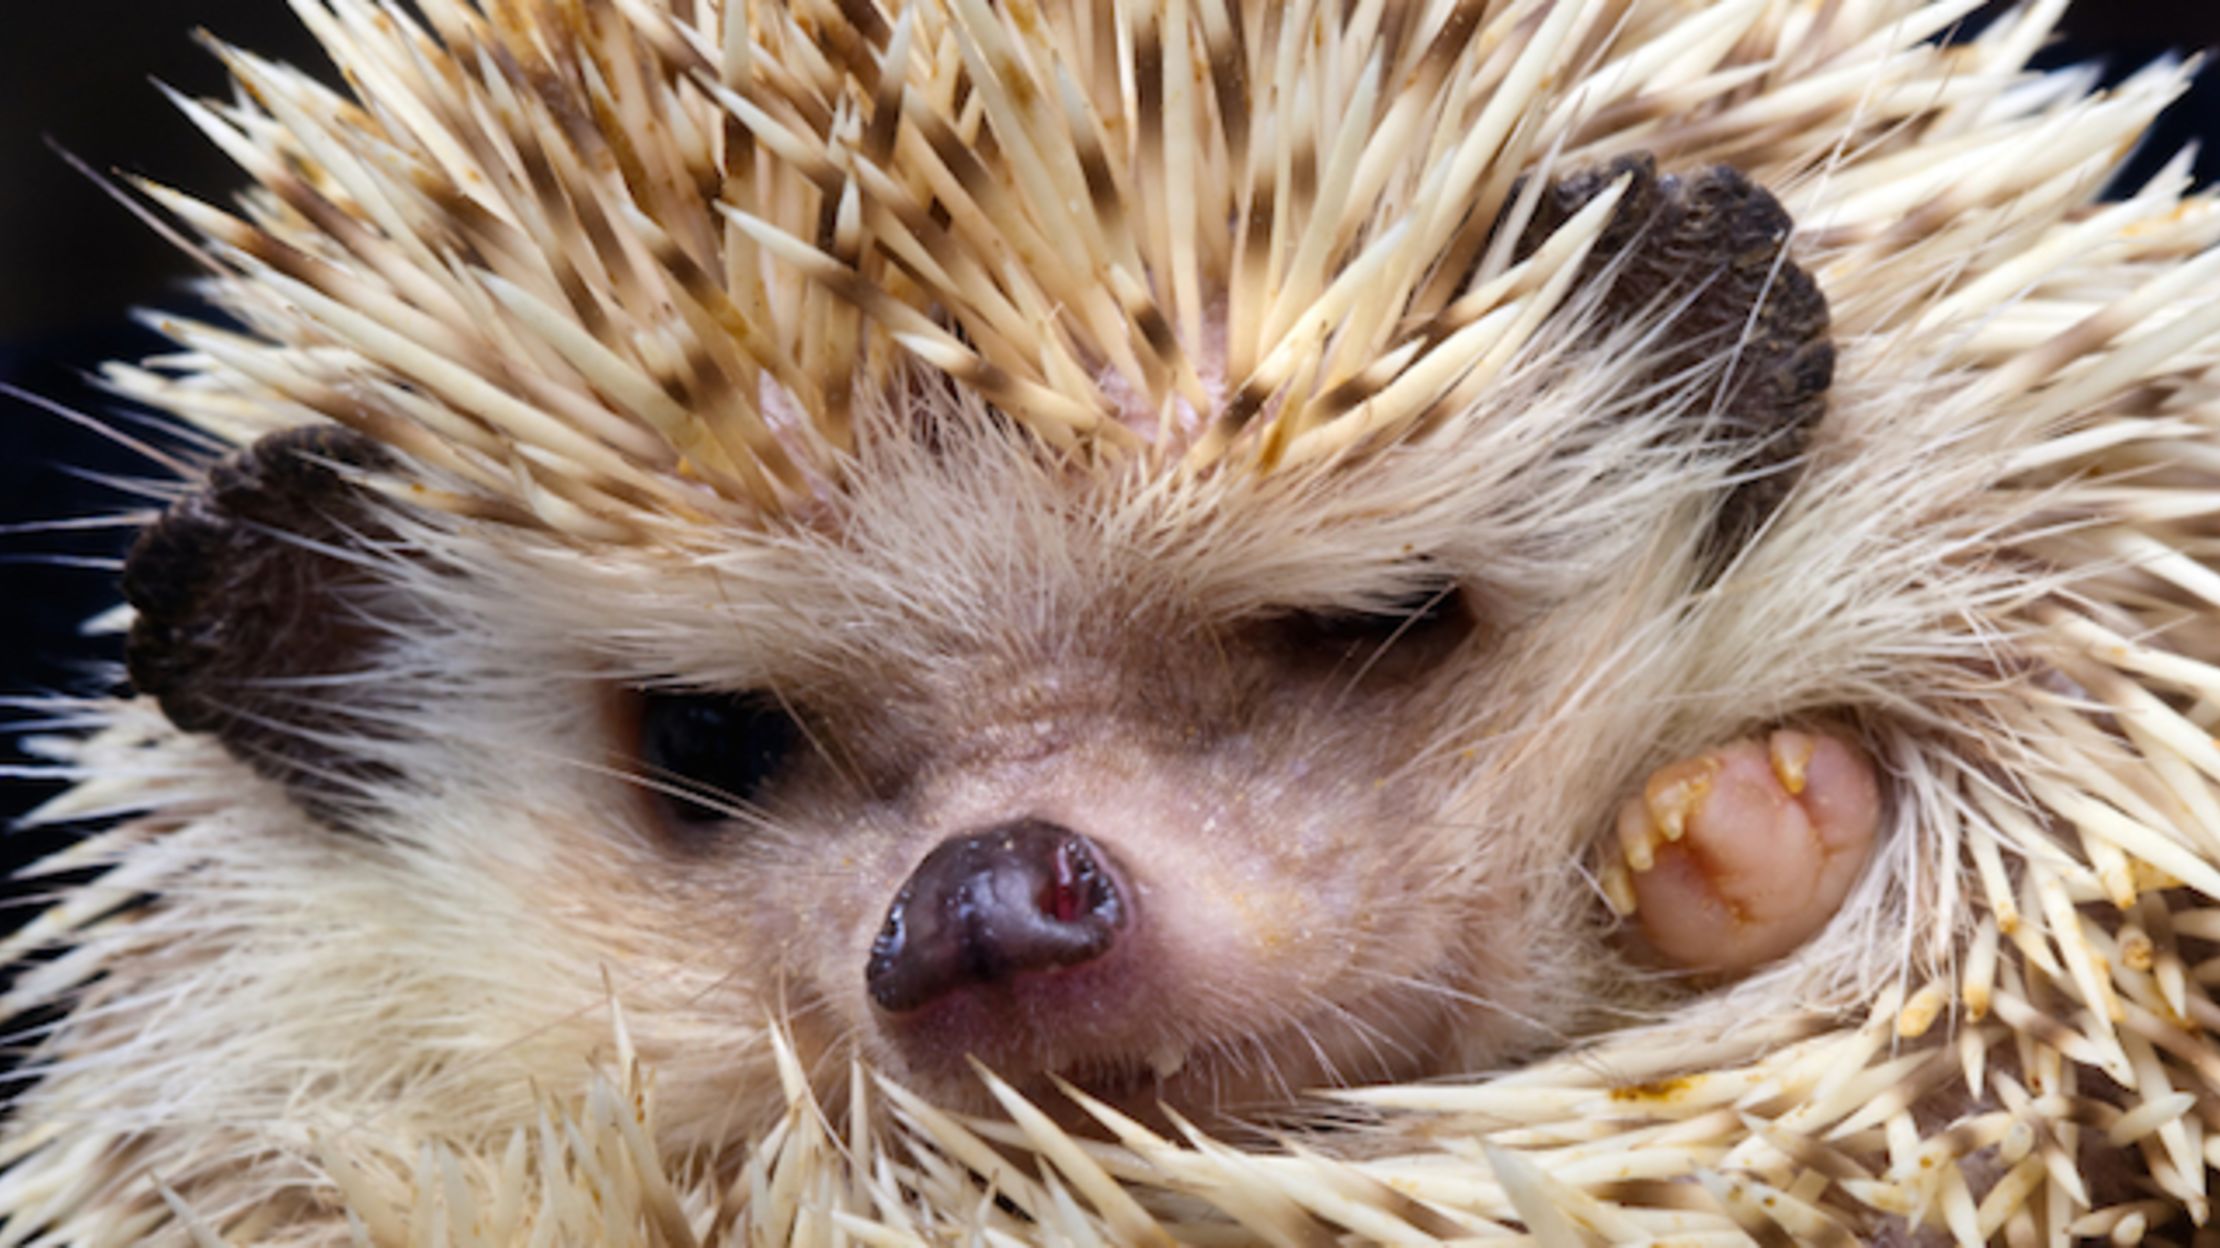 A Member of Parliament Wants Hedgehogs as the UK's National Species